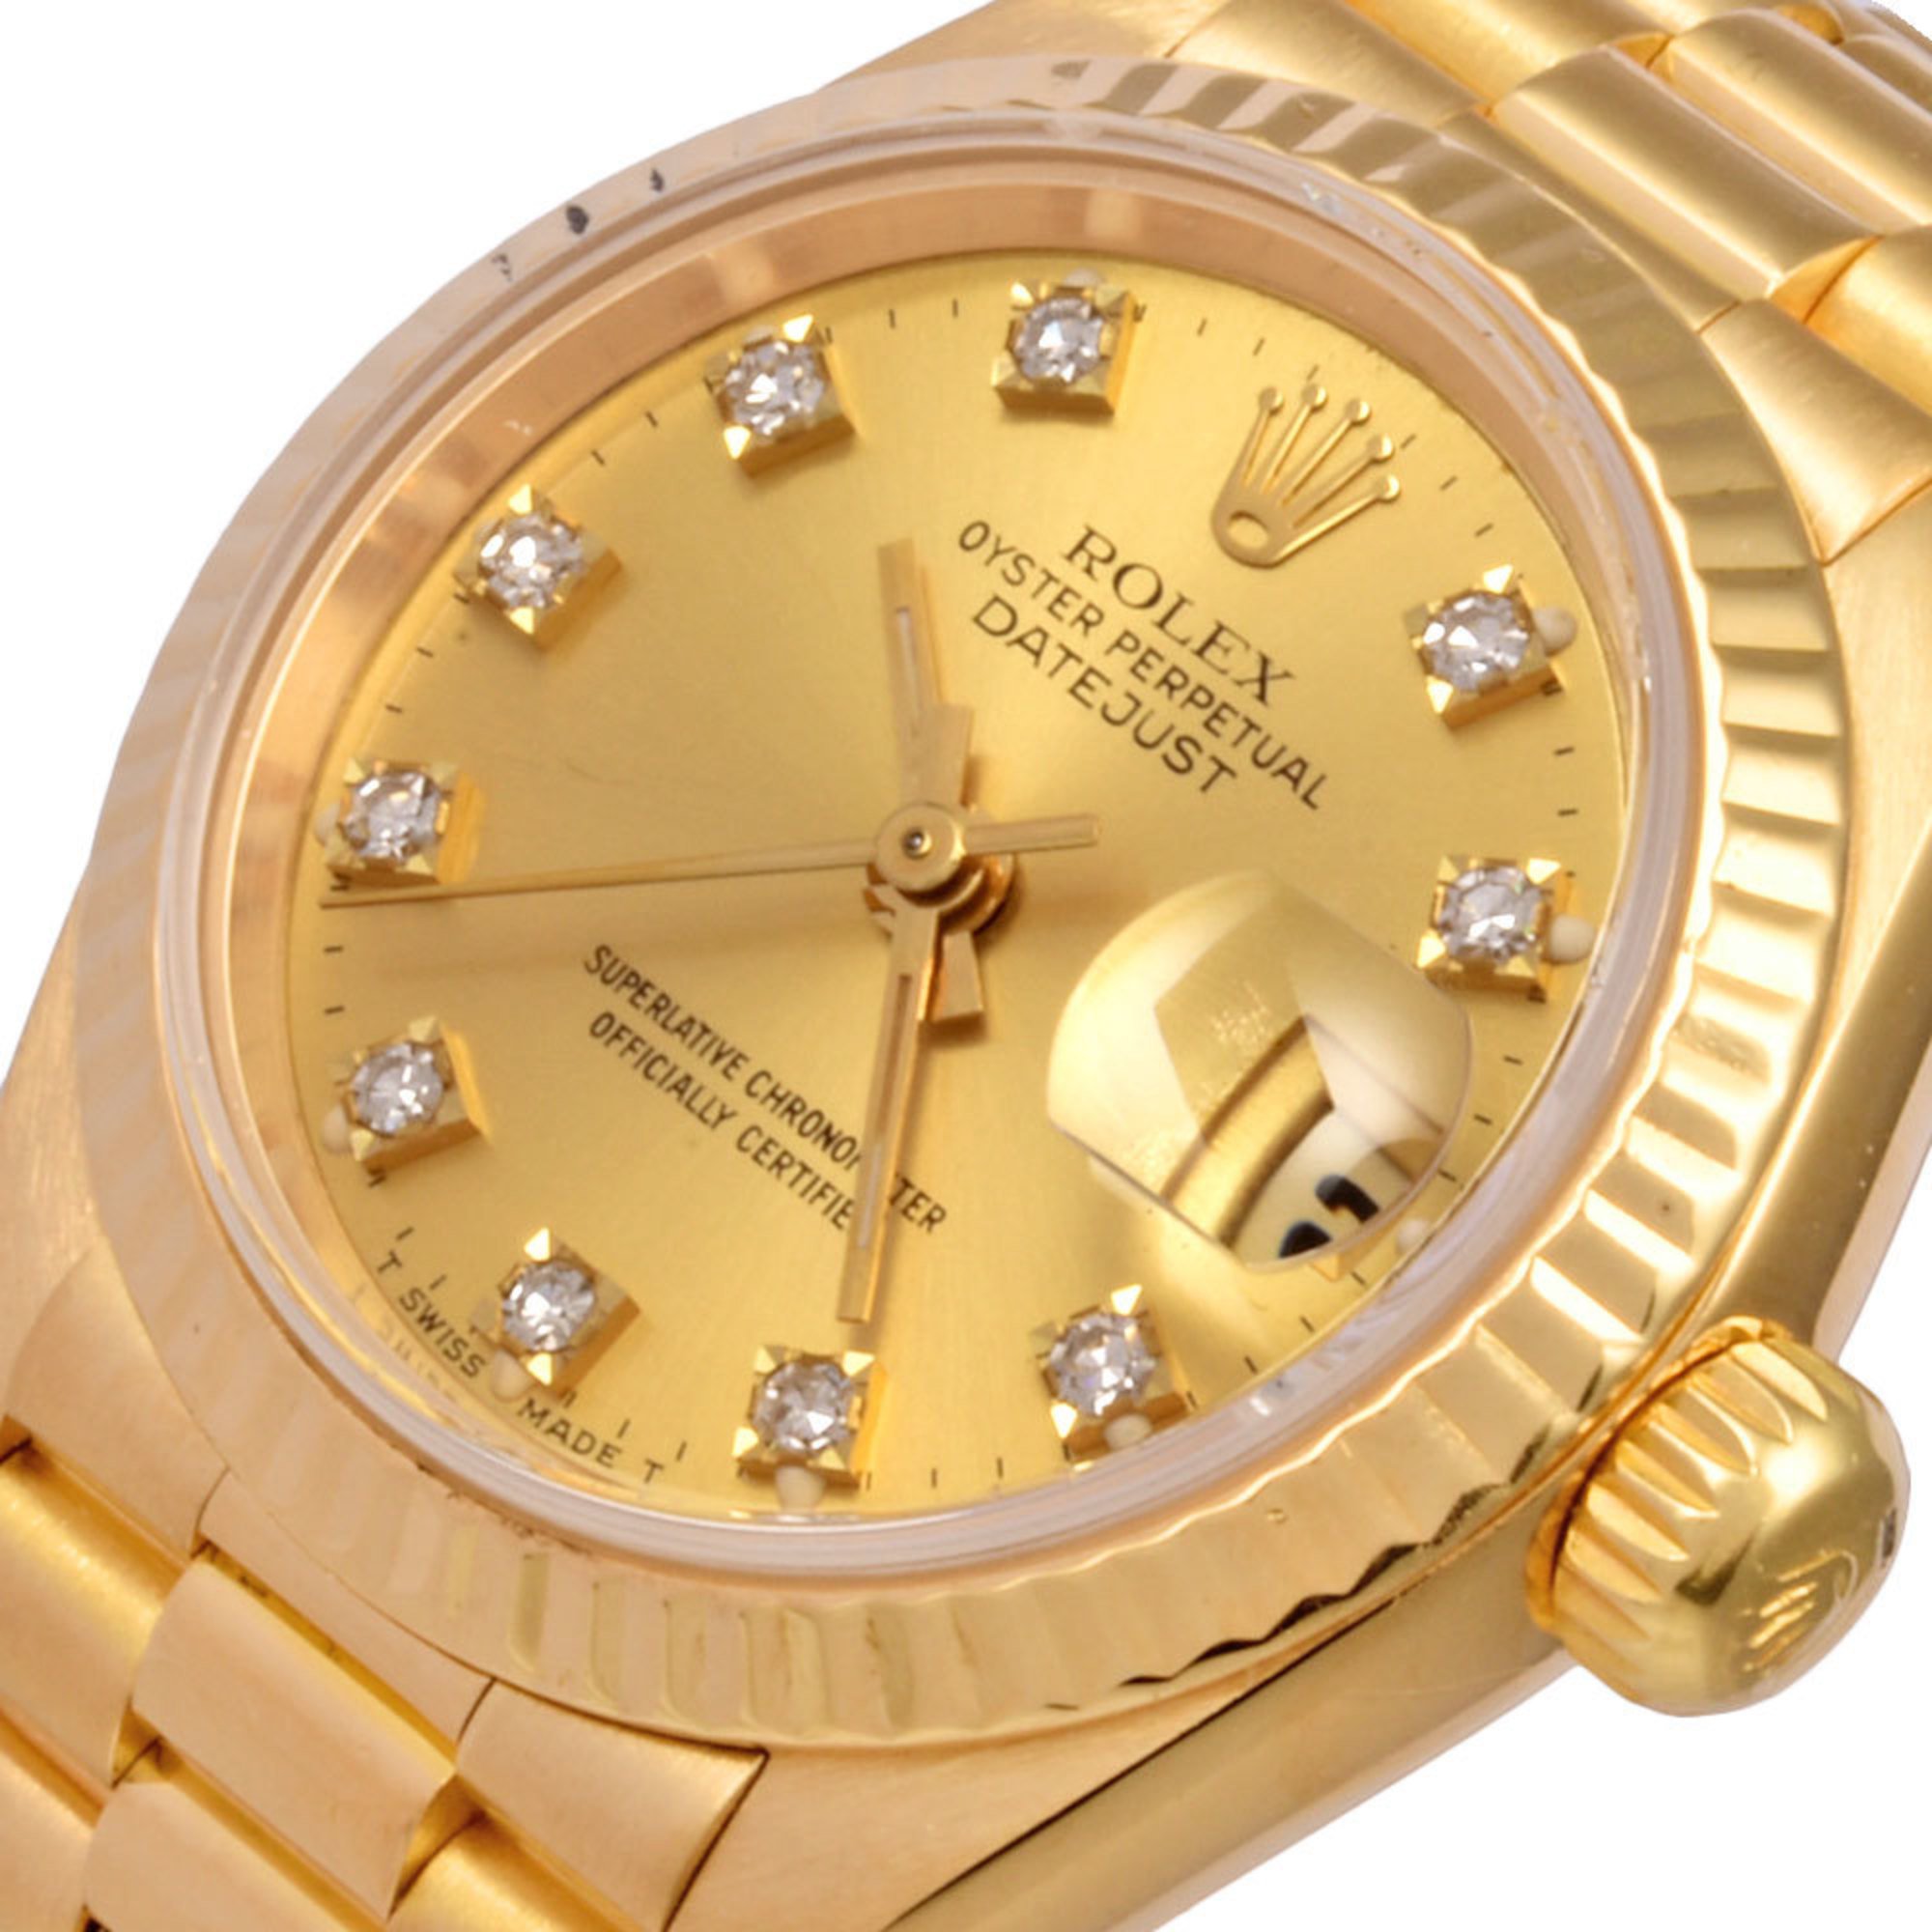 Rolex ROLEX 69178G Datejust 10P Diamond L Series (manufactured in 1989) Automatic Watch Champagne Dial K18 Solid Gold Ladies